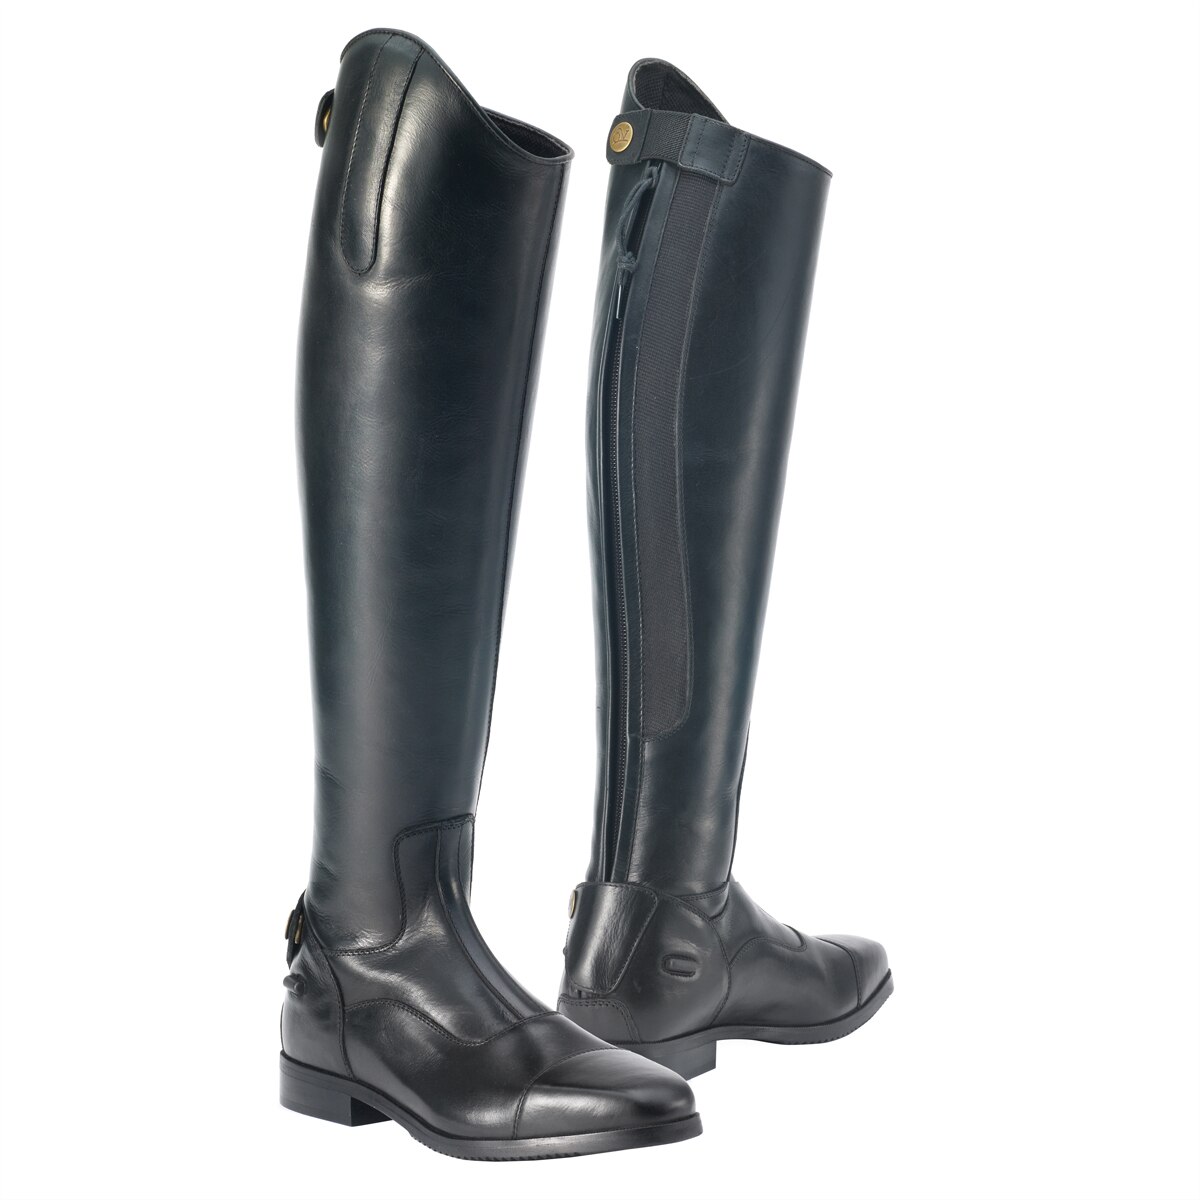 Ovation Ladies Olympia Tall Show Boot Soft Leather Upper Square Toe Cap 